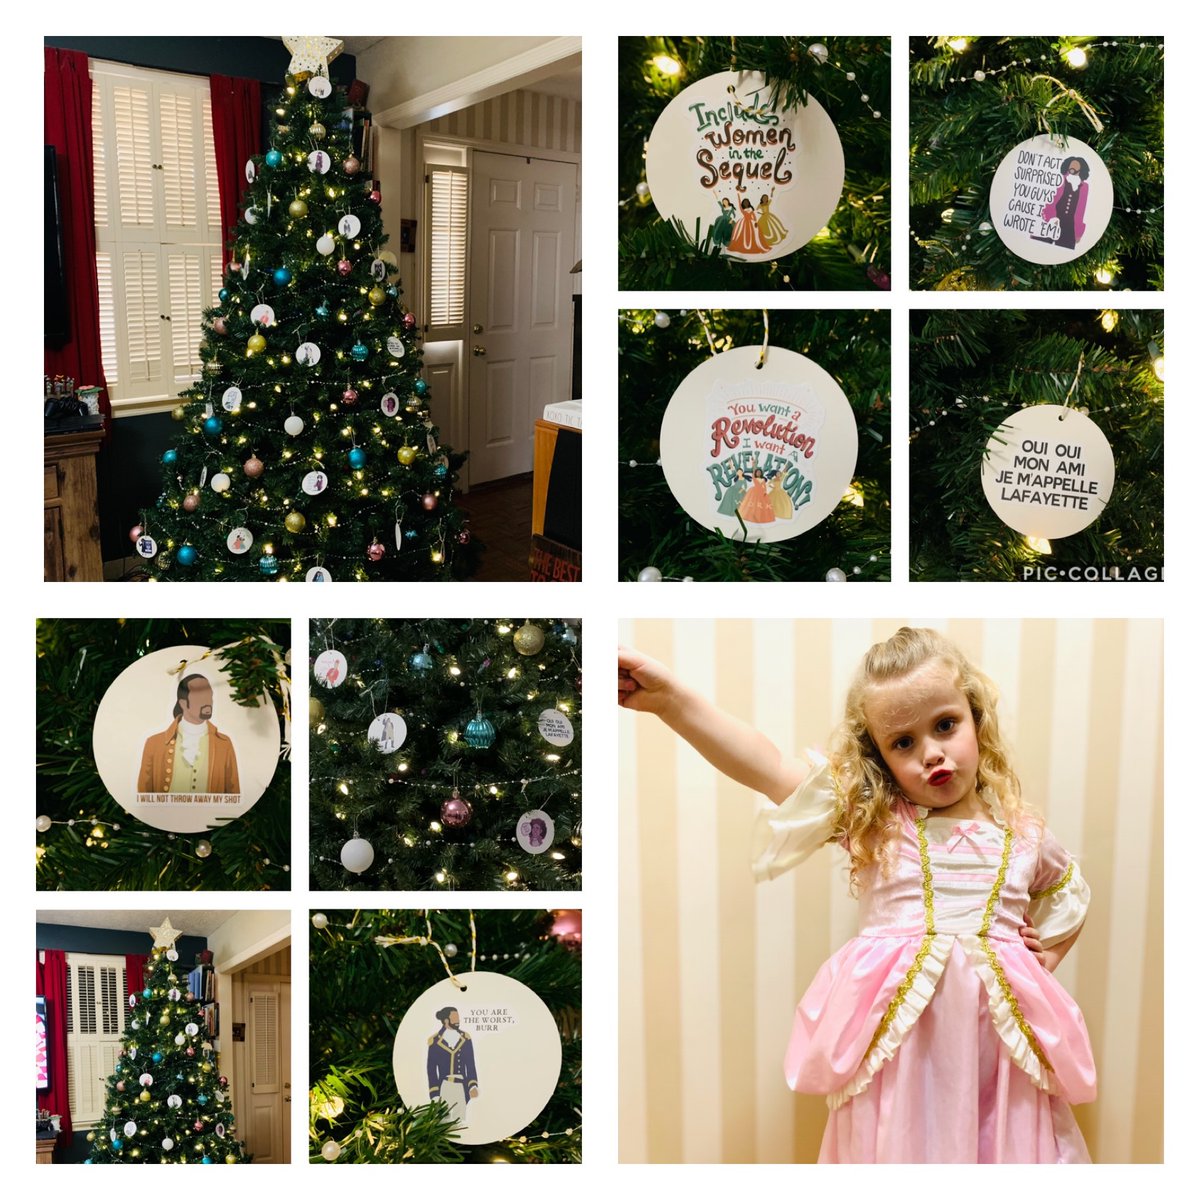 @HamiltonMusical Our #Hamilkids quote Hamilton on a daily basis & INSISTED we have a #Hamiltree at Christmas!